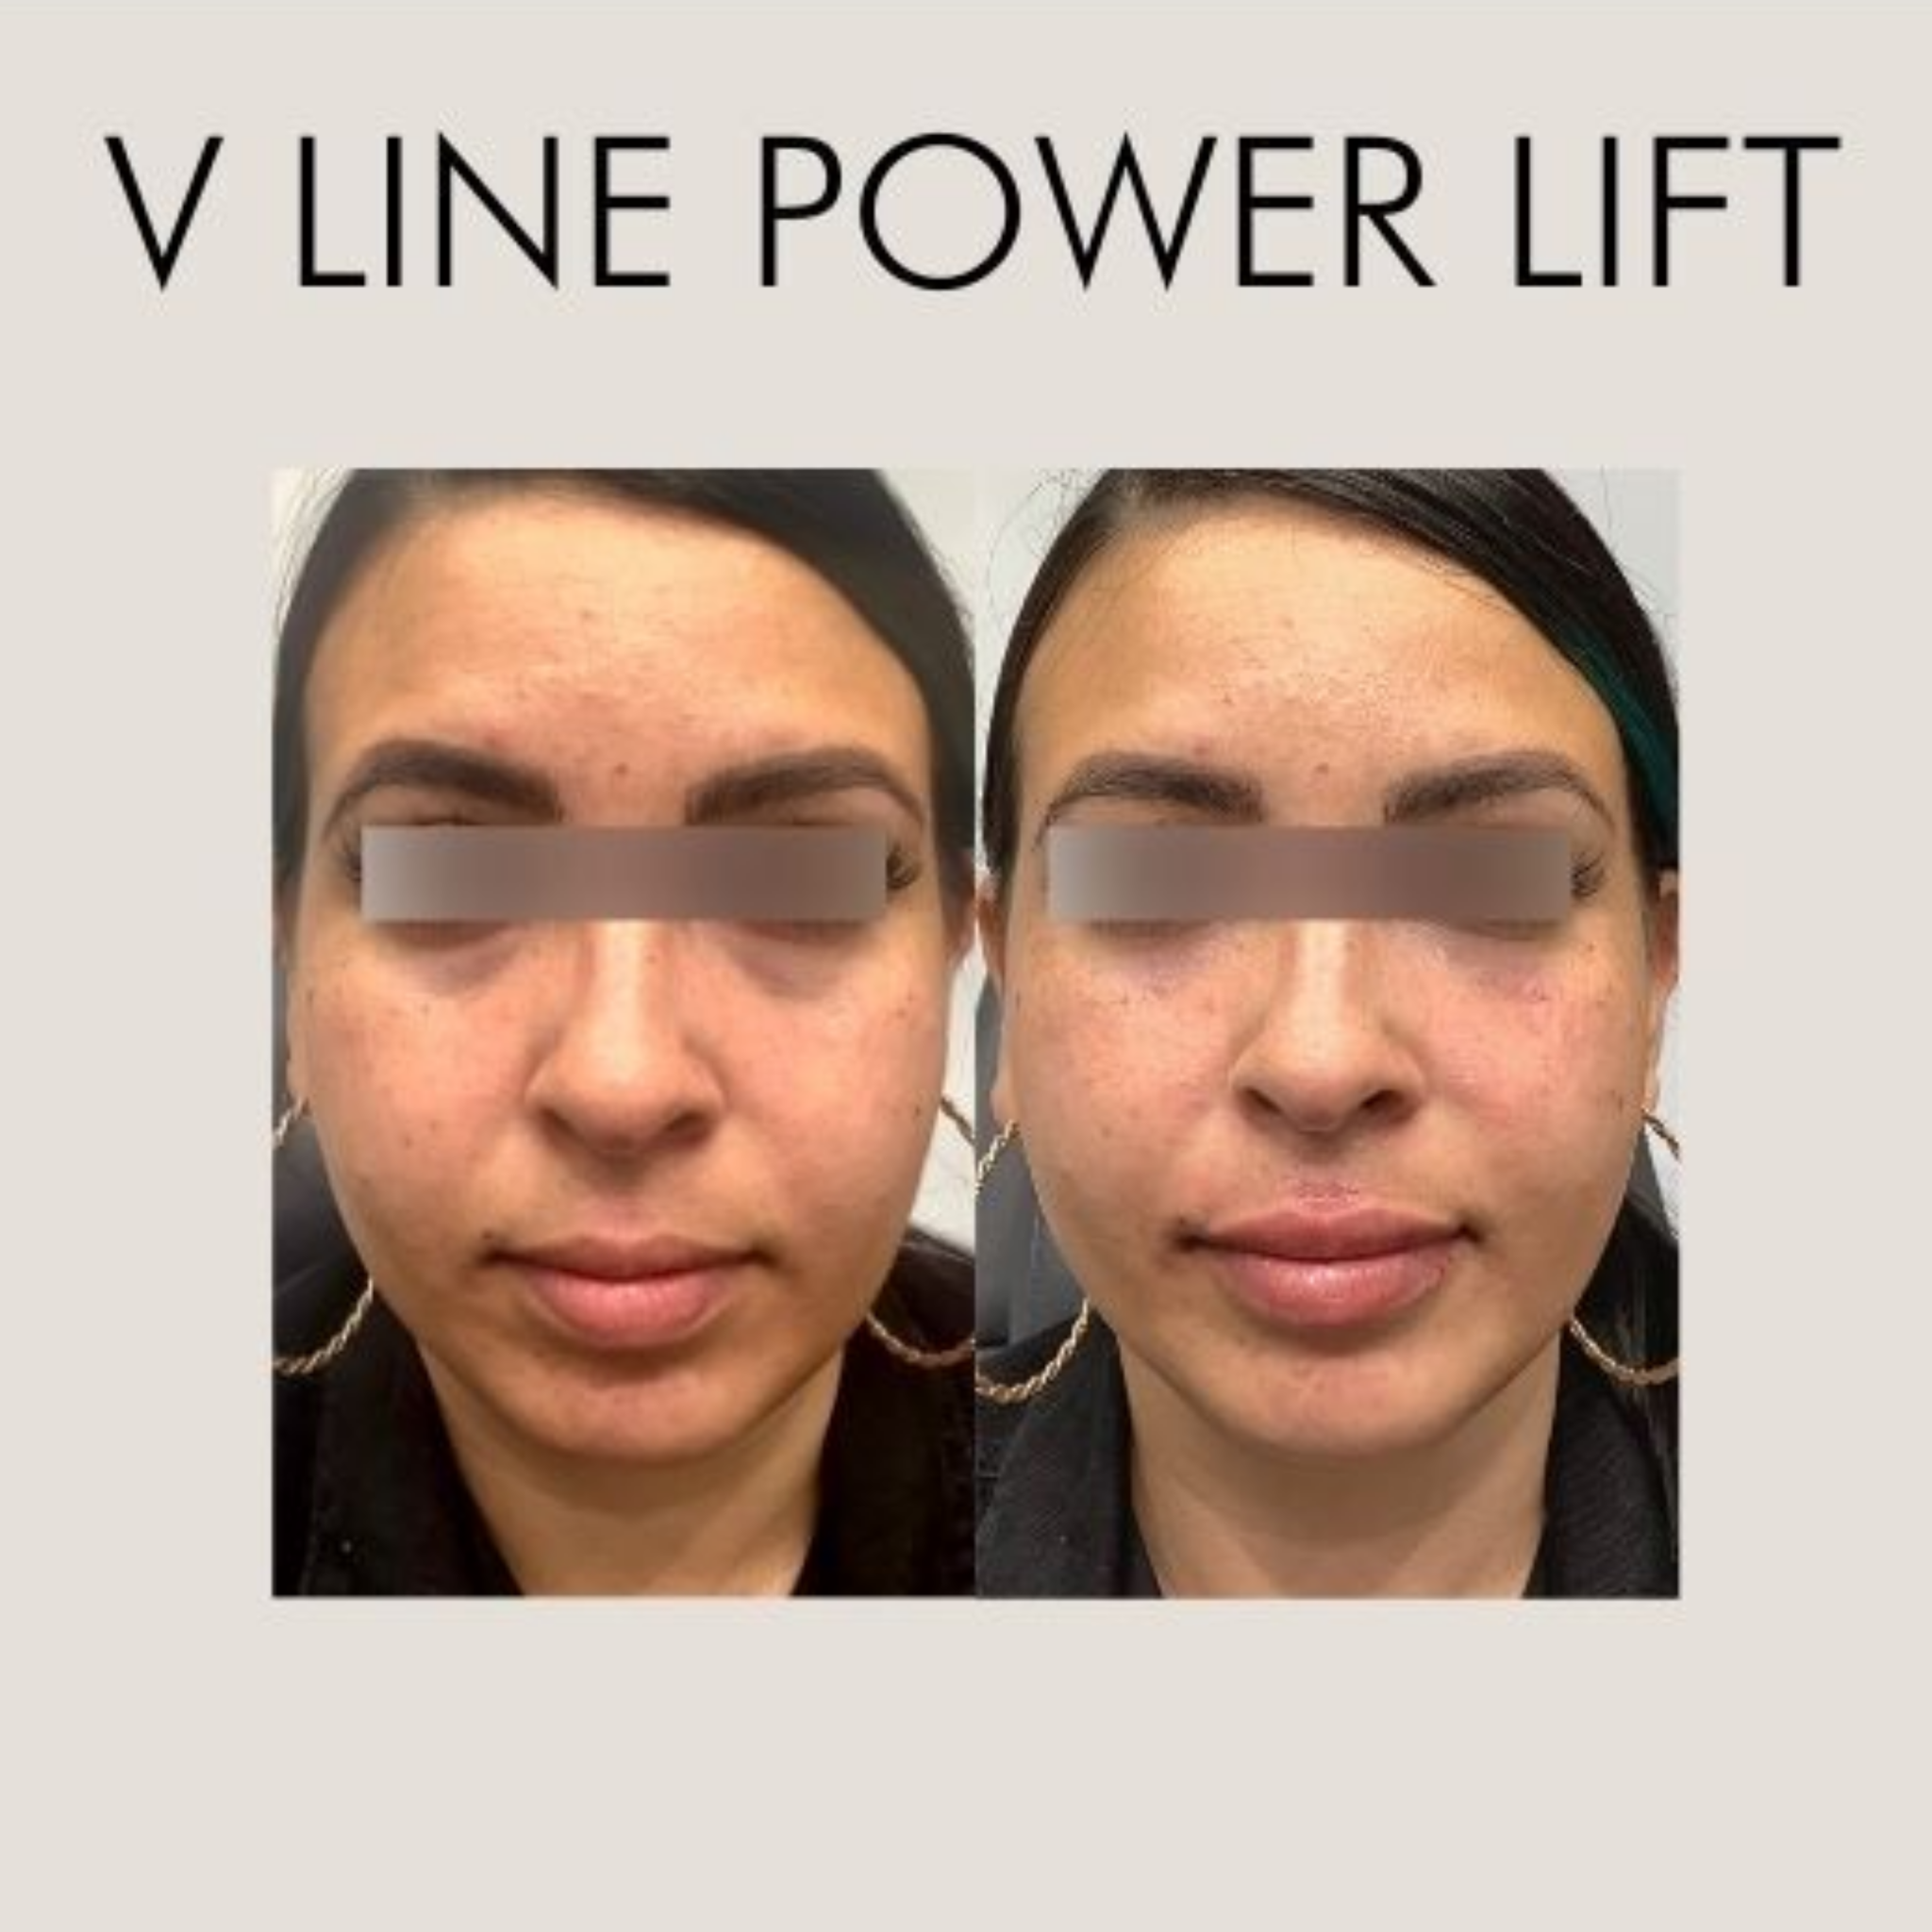 Skin Perfect Brothers - vline power lift beaf